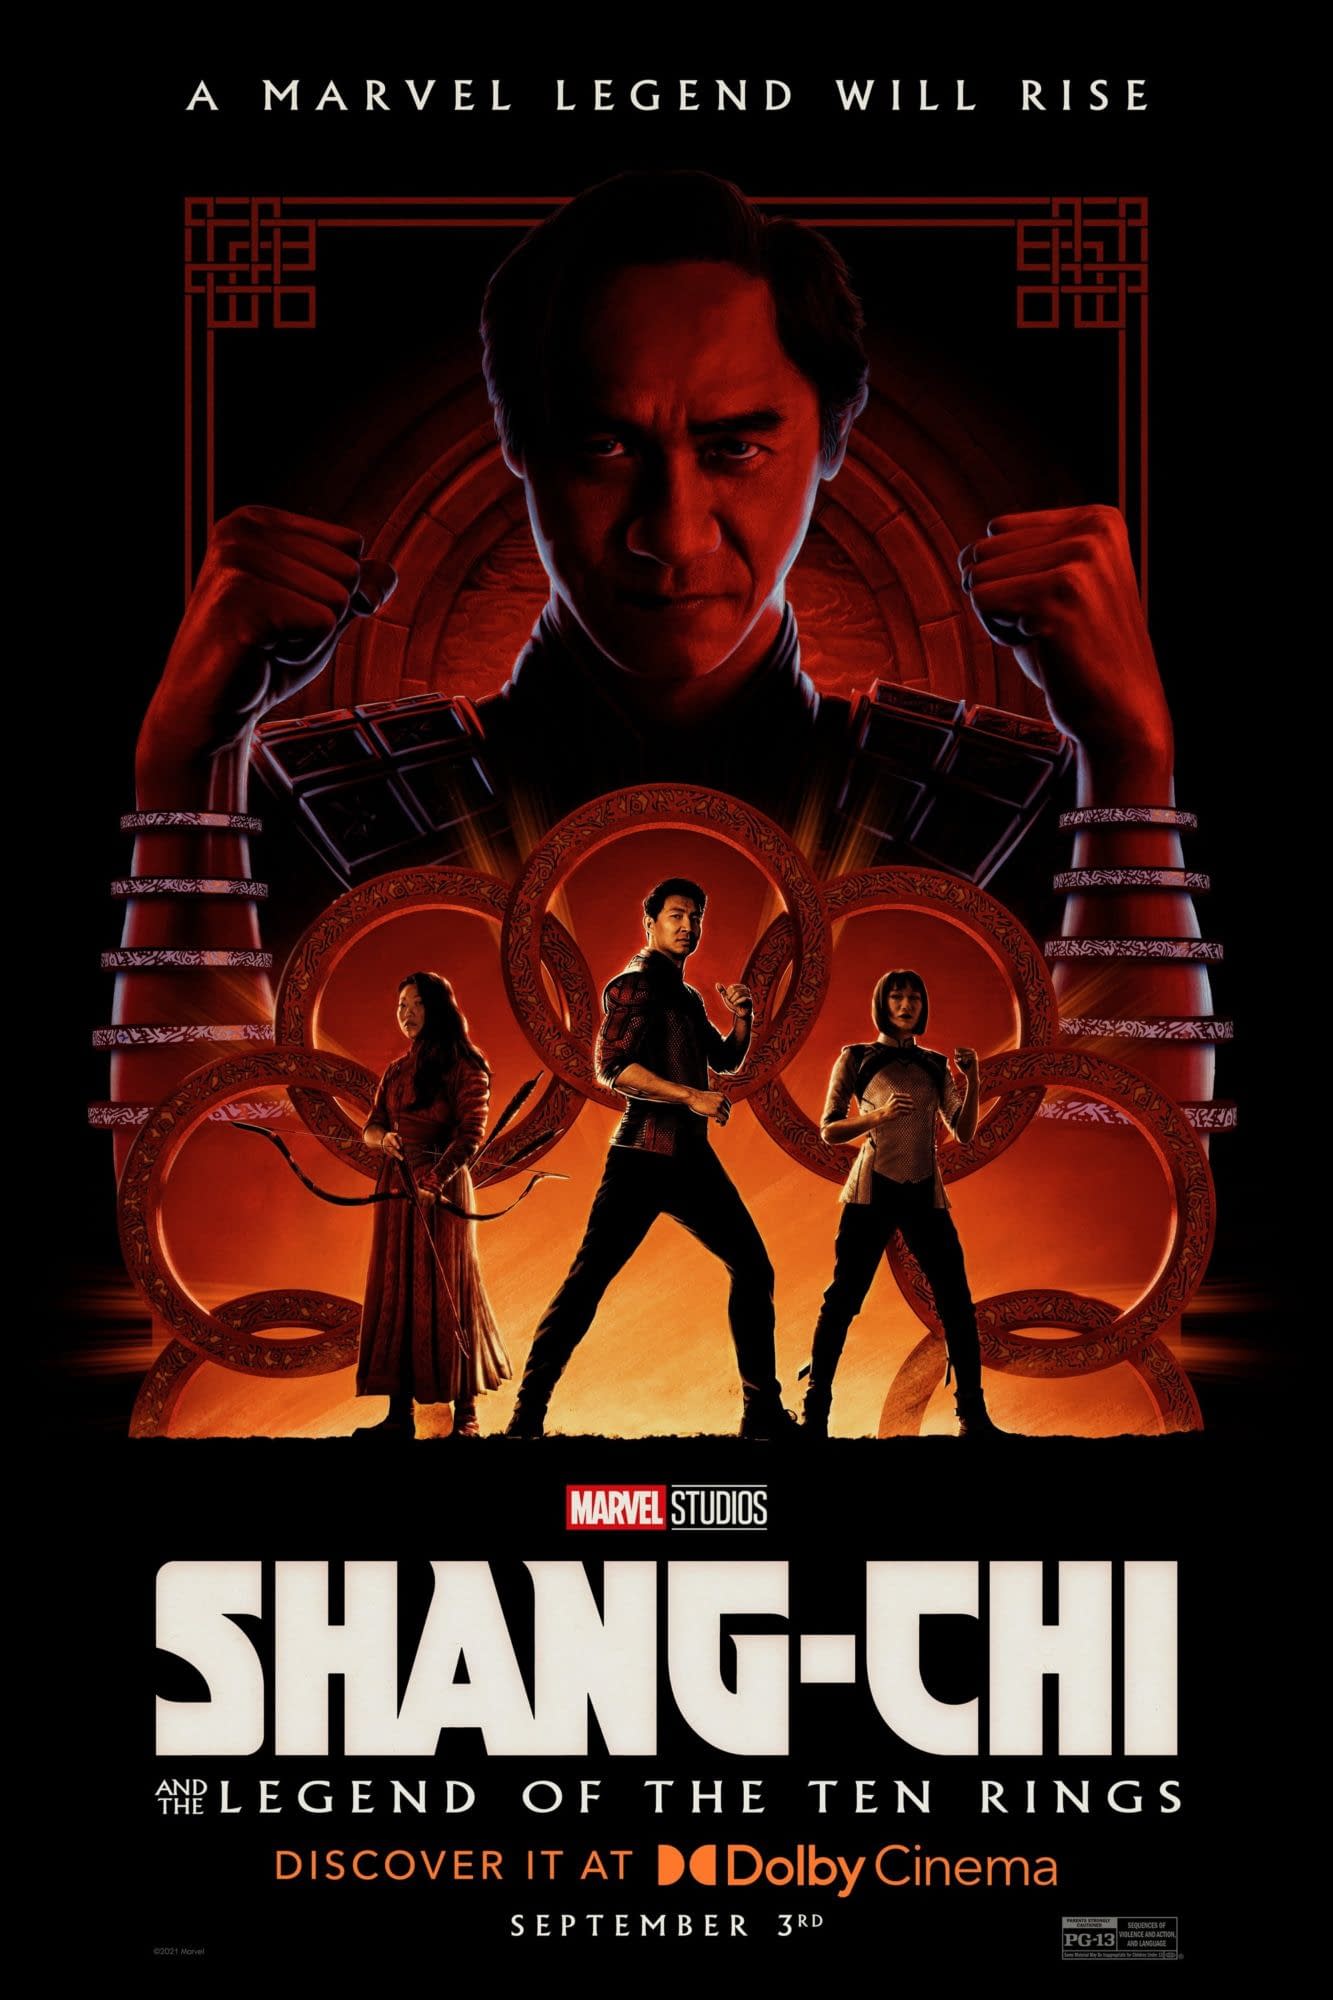 SHANG CHI AND THE LEGEND OF THE TEN RINGS